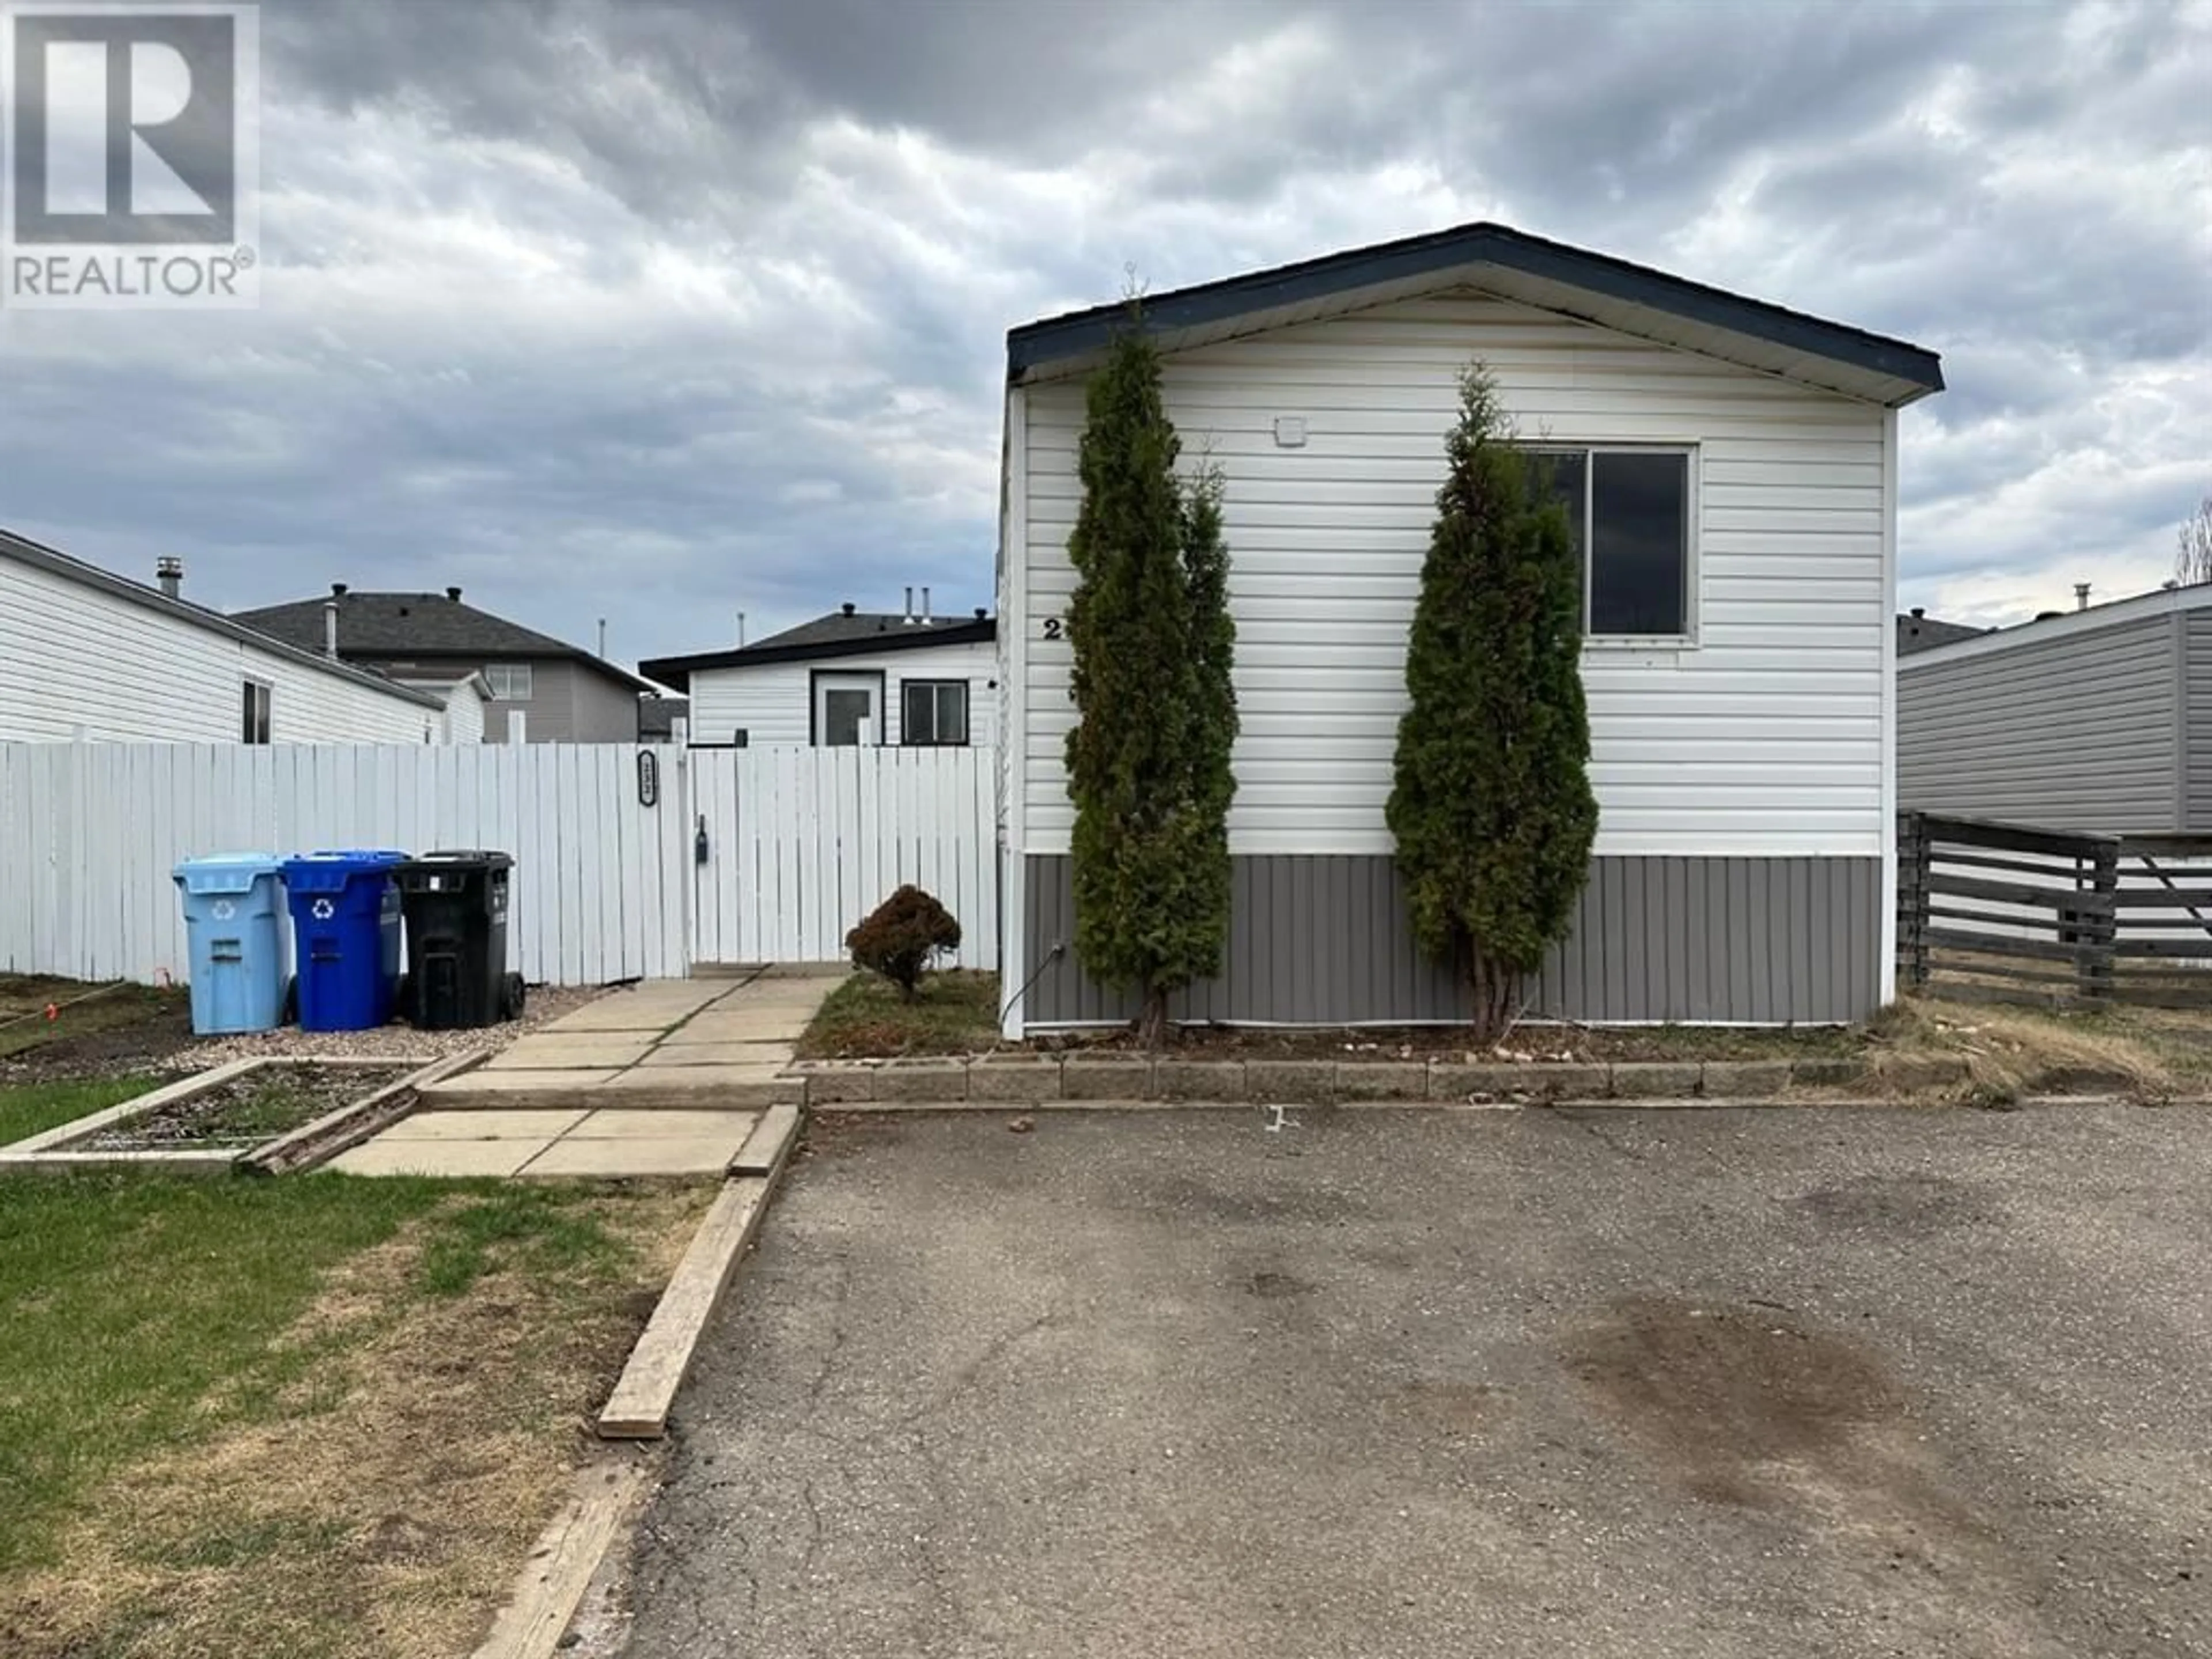 Shed for 232 Caouette Crescent, Fort McMurray Alberta T9K2H9